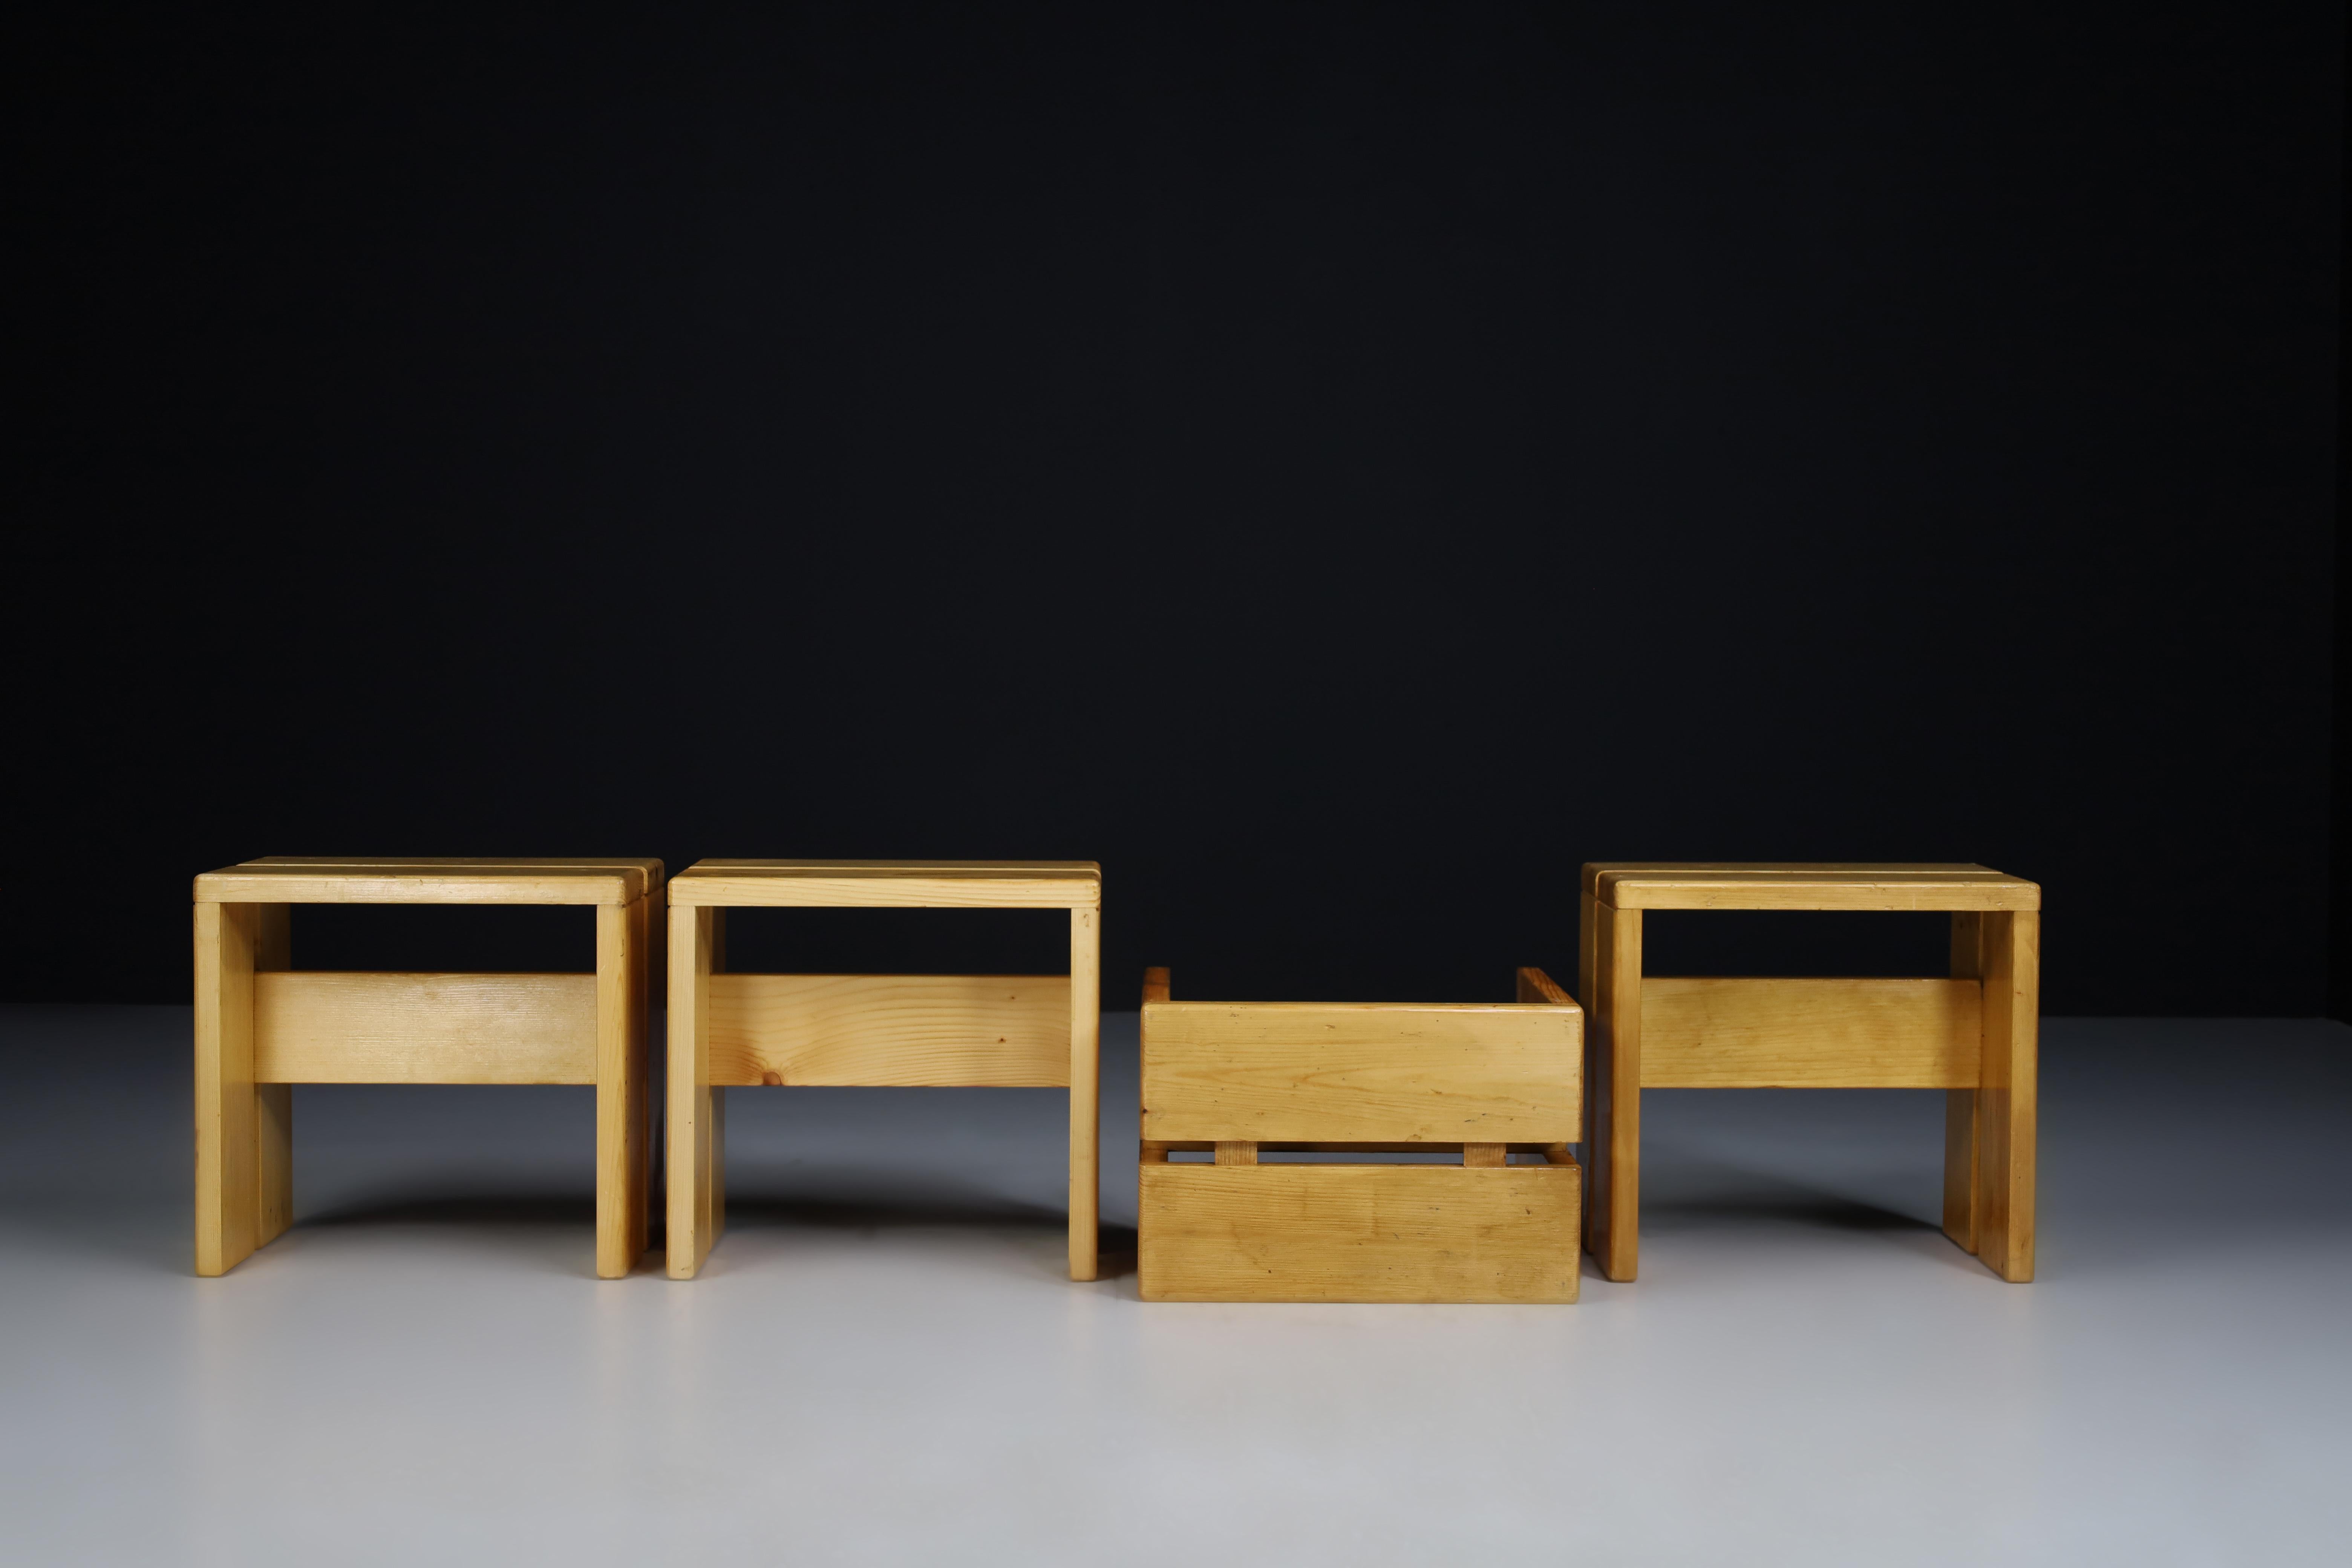 Charlotte Perriand pair of four stools in pine wood for Les Arcs ski resort, circa 1960 manufactured in France. These are the iconic Charlotte Perriand simple and straightforward pine stools used commonly throughout the ski resort. The four stools